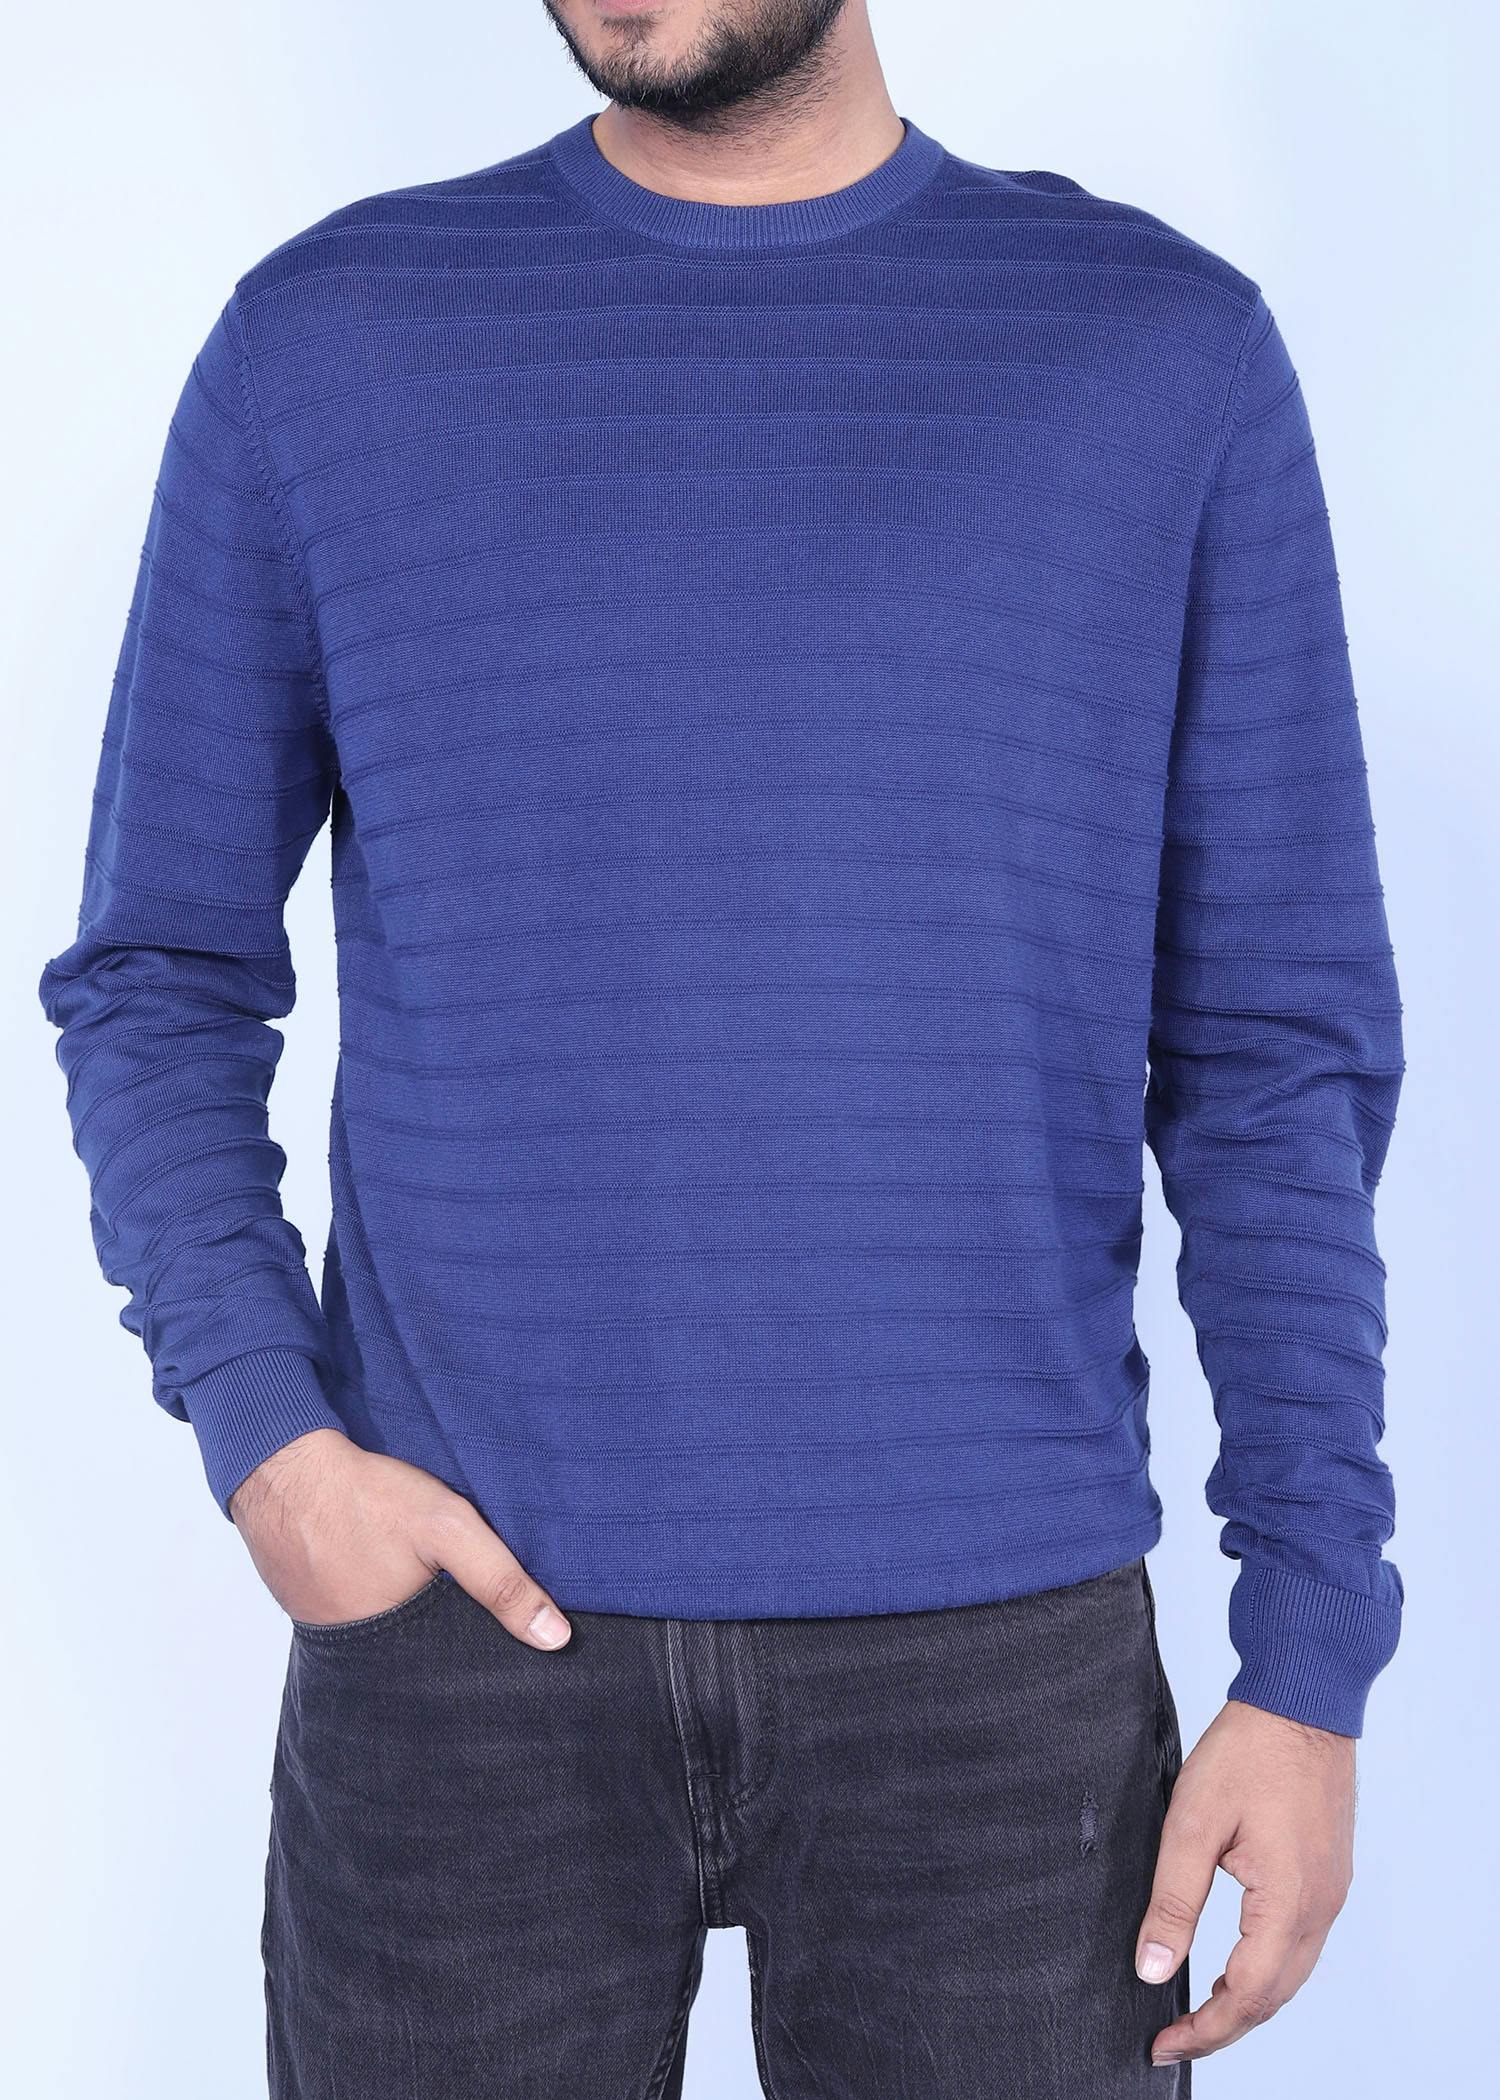 olibird sweater blue color half front view